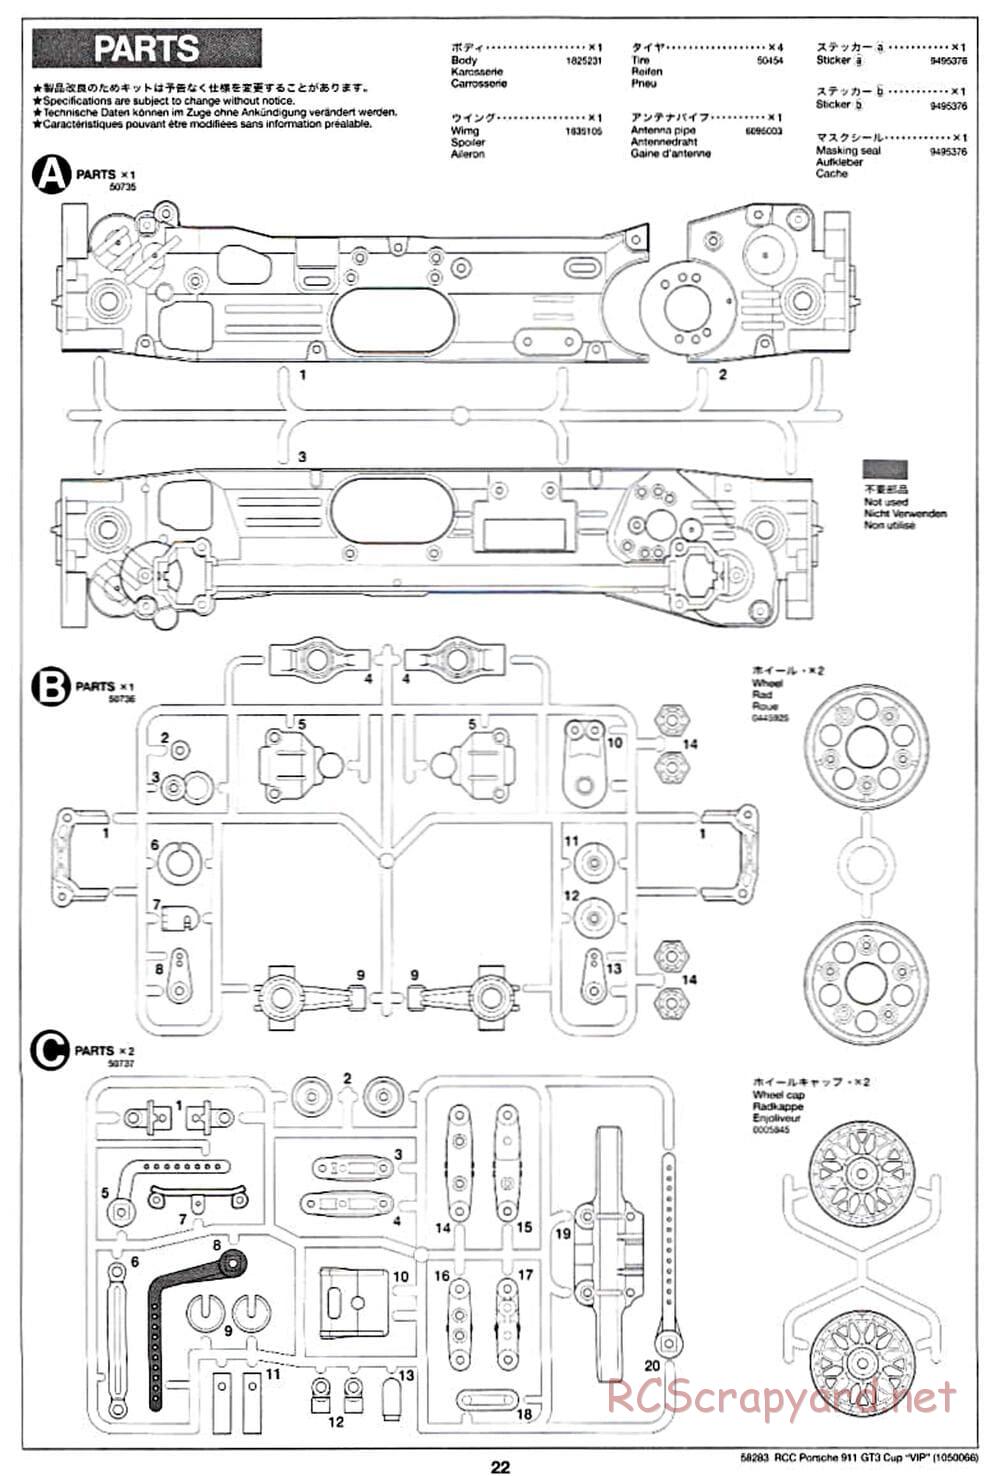 Tamiya - Porsche 911 GT3 Cup VIP - TL-01 Chassis - Manual - Page 22